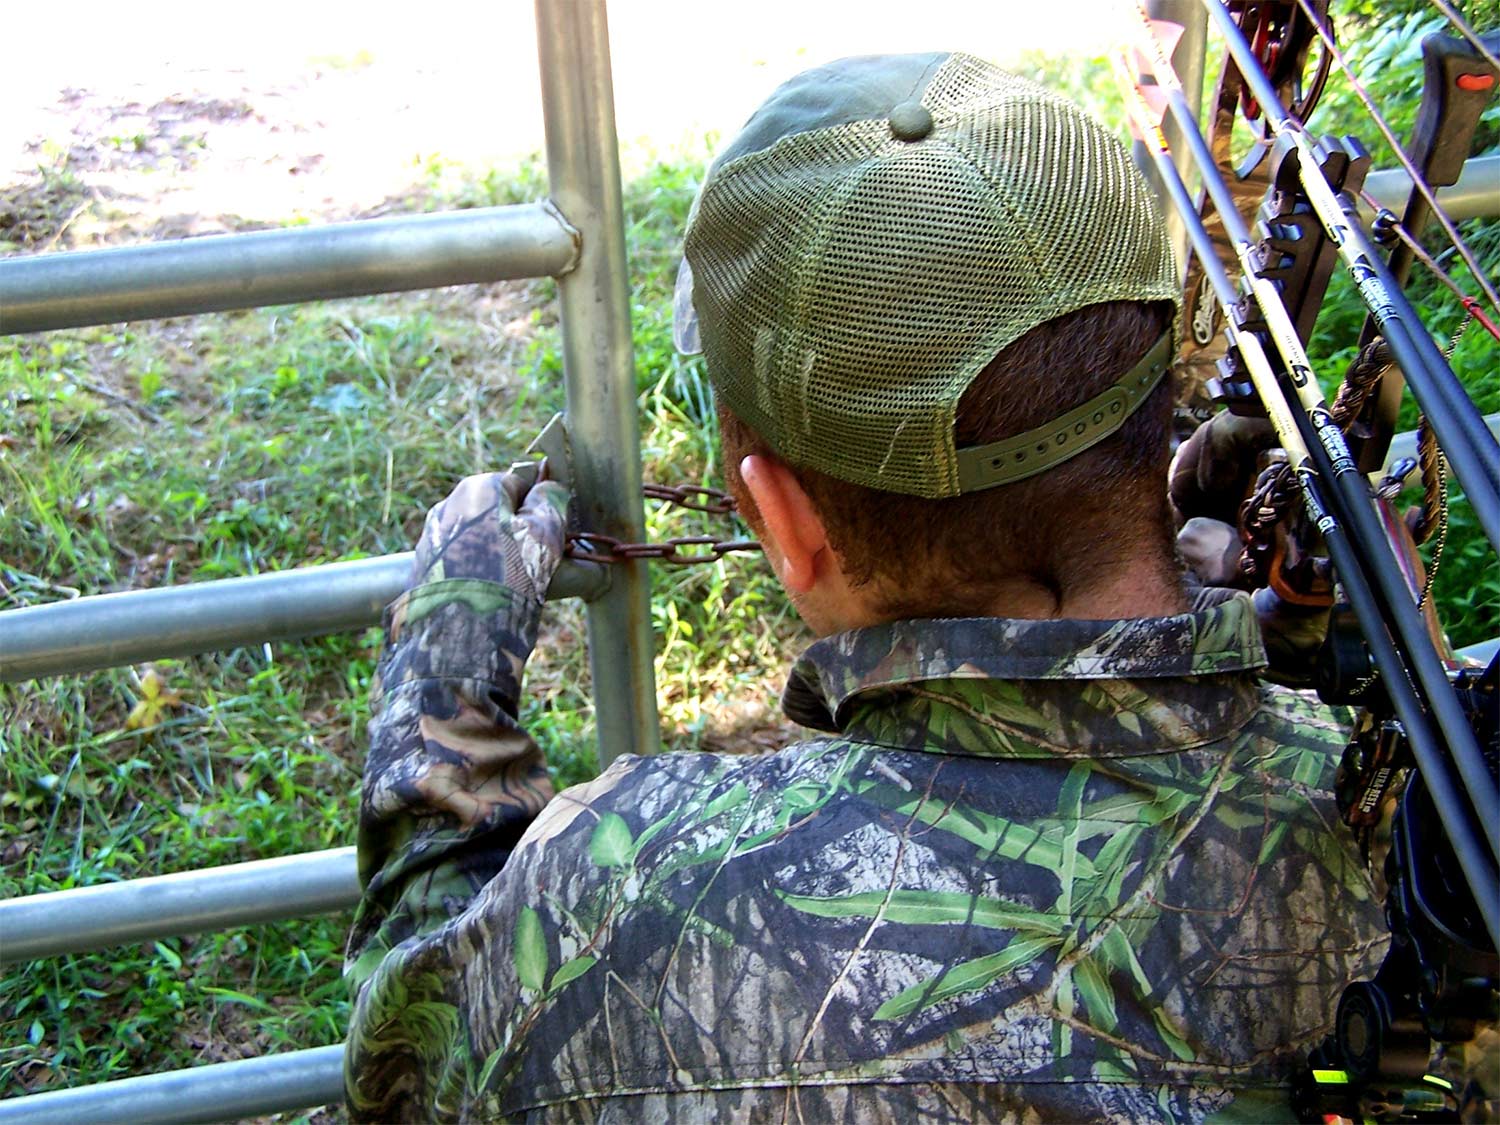 A hunter opens a chain link to open a gate.